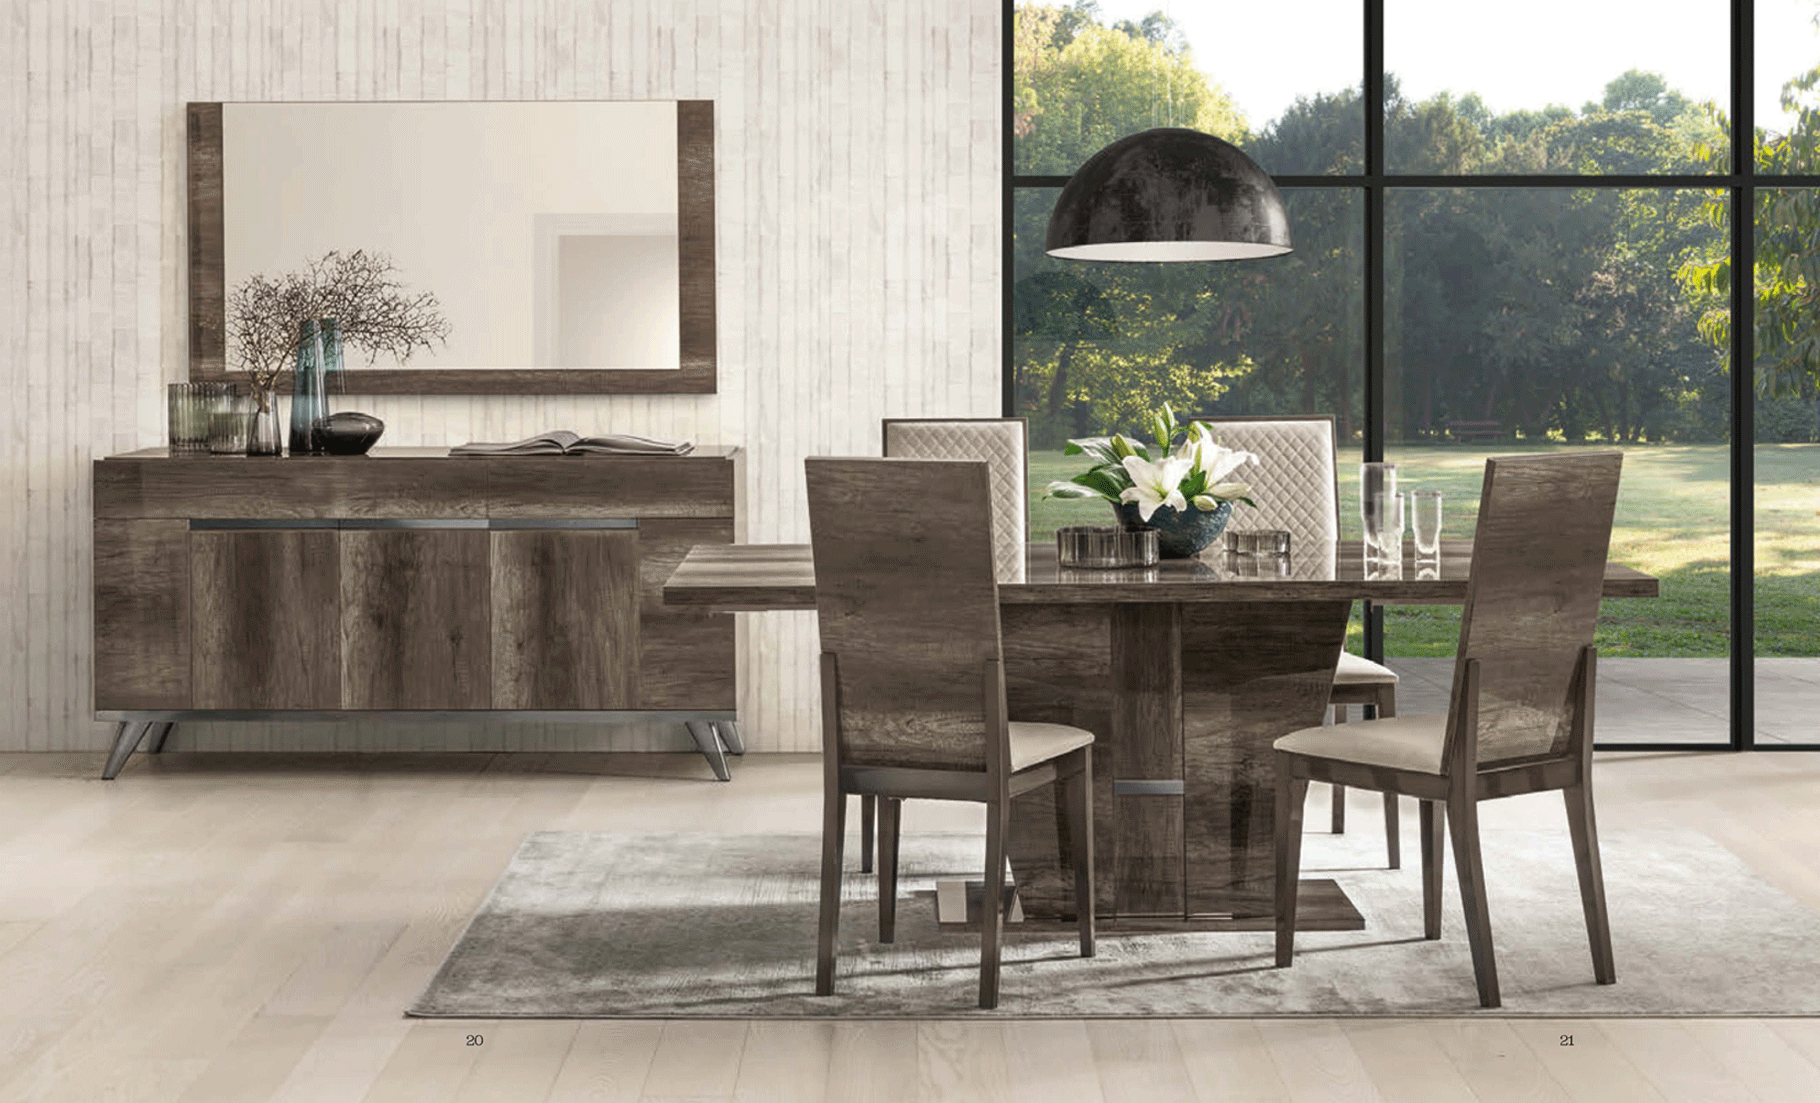 Dining Room Furniture Marble-Look Tables Medea Day Additional Items